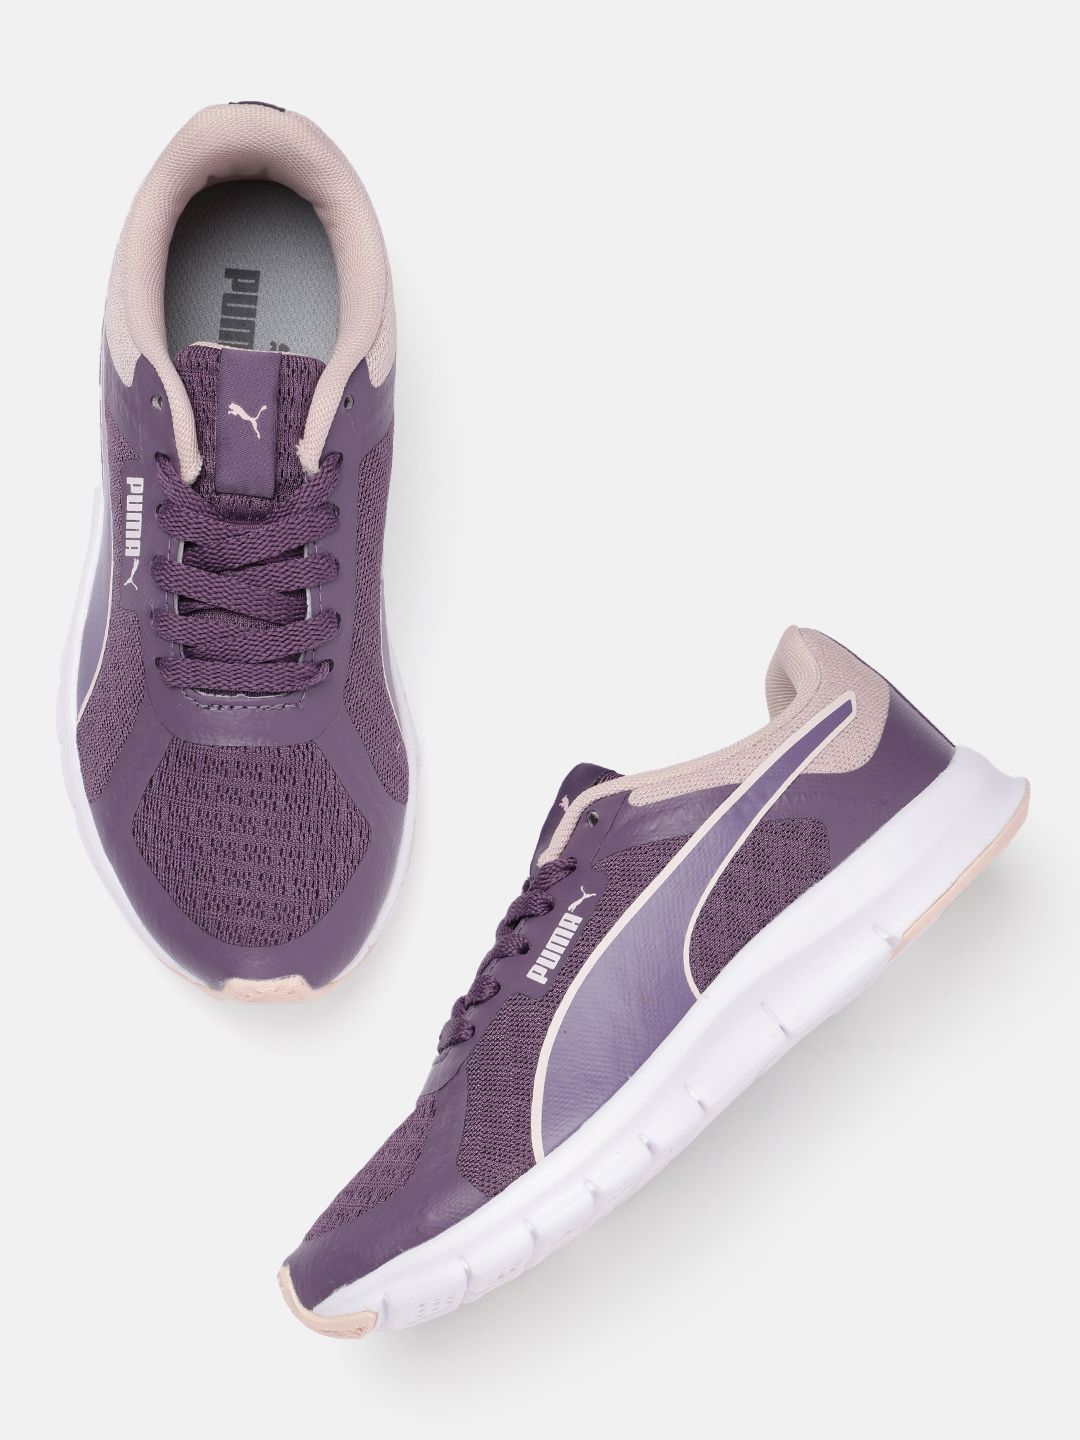 Puma Women Trackracer 2.0 Striped Sneakers Price in India